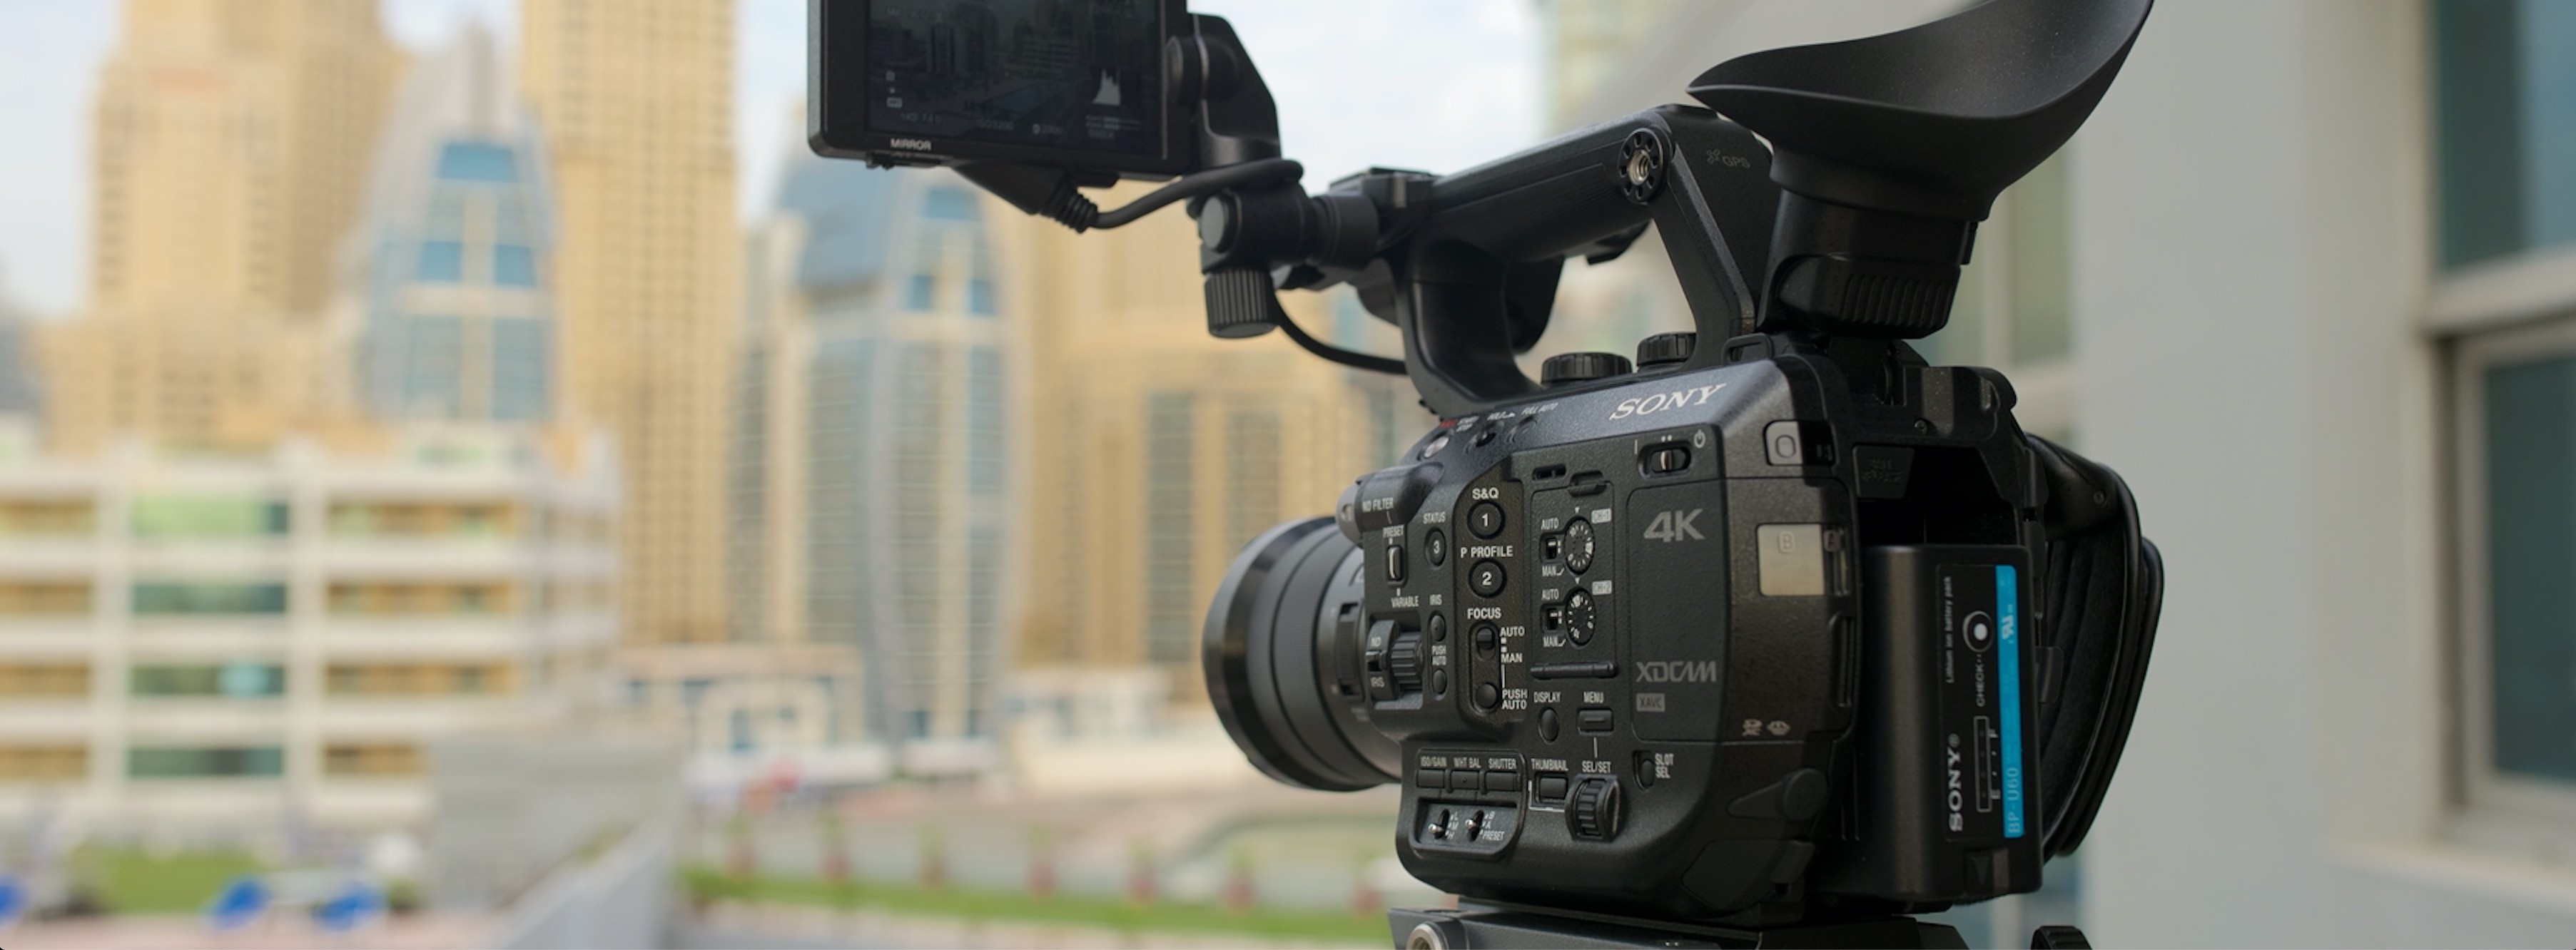 Sony FS5 Initial Thoughts<br> (pre-production model)